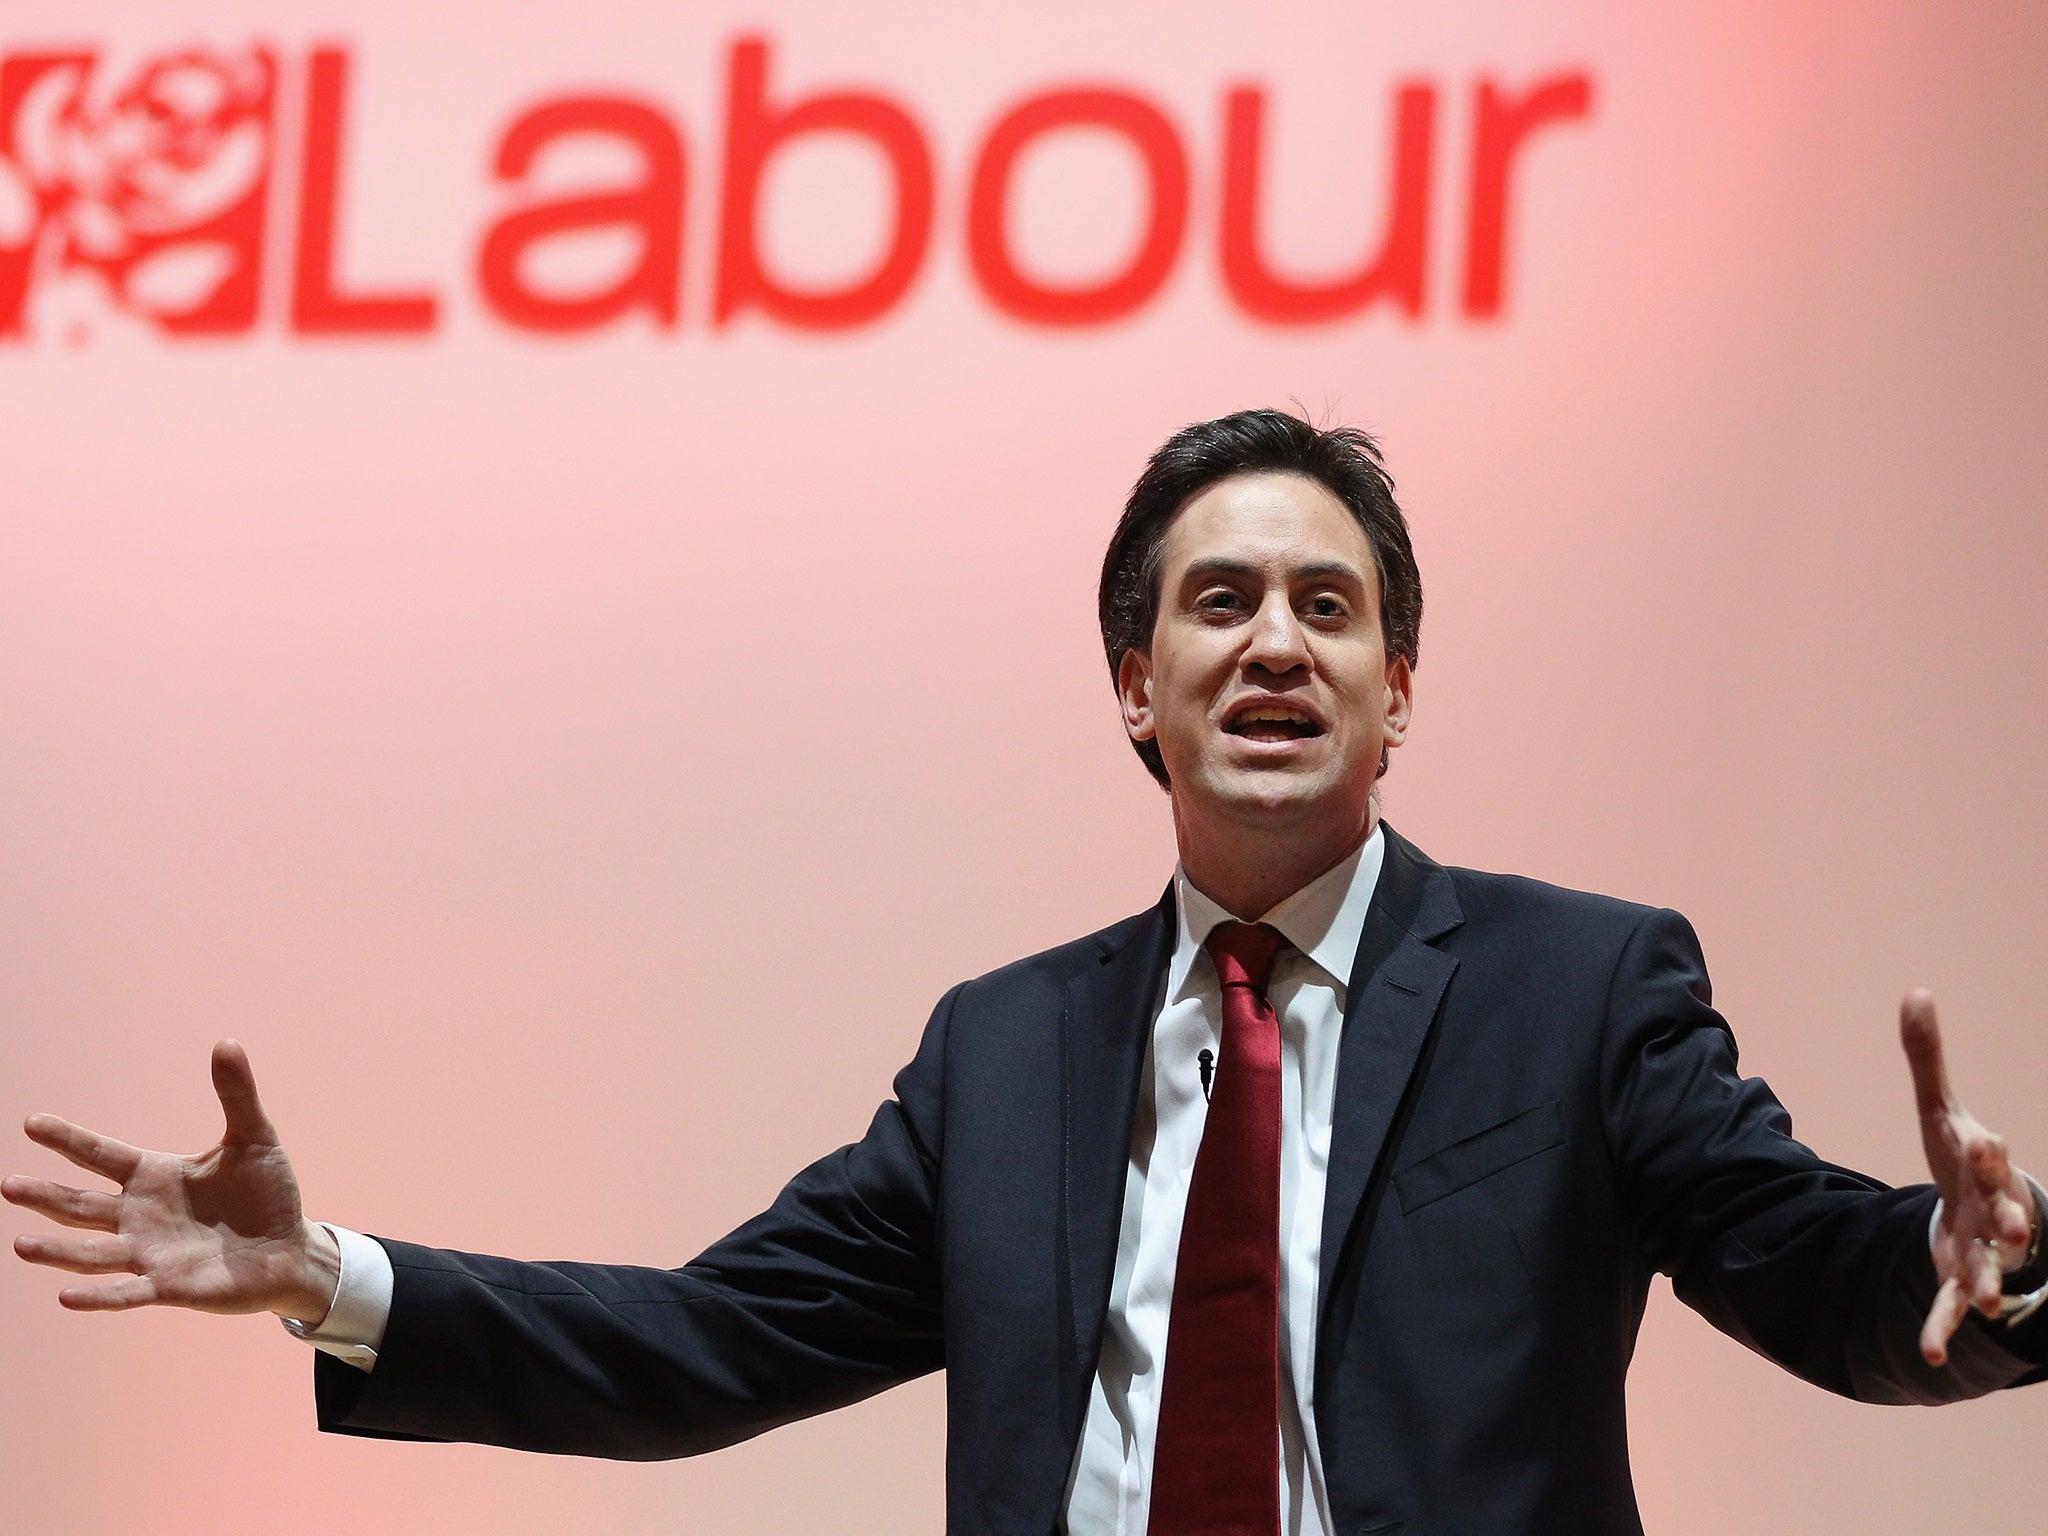 Ed Miliband has “big questions” to answer over his leadership credentials, according to Sturgeon (Getty Images)